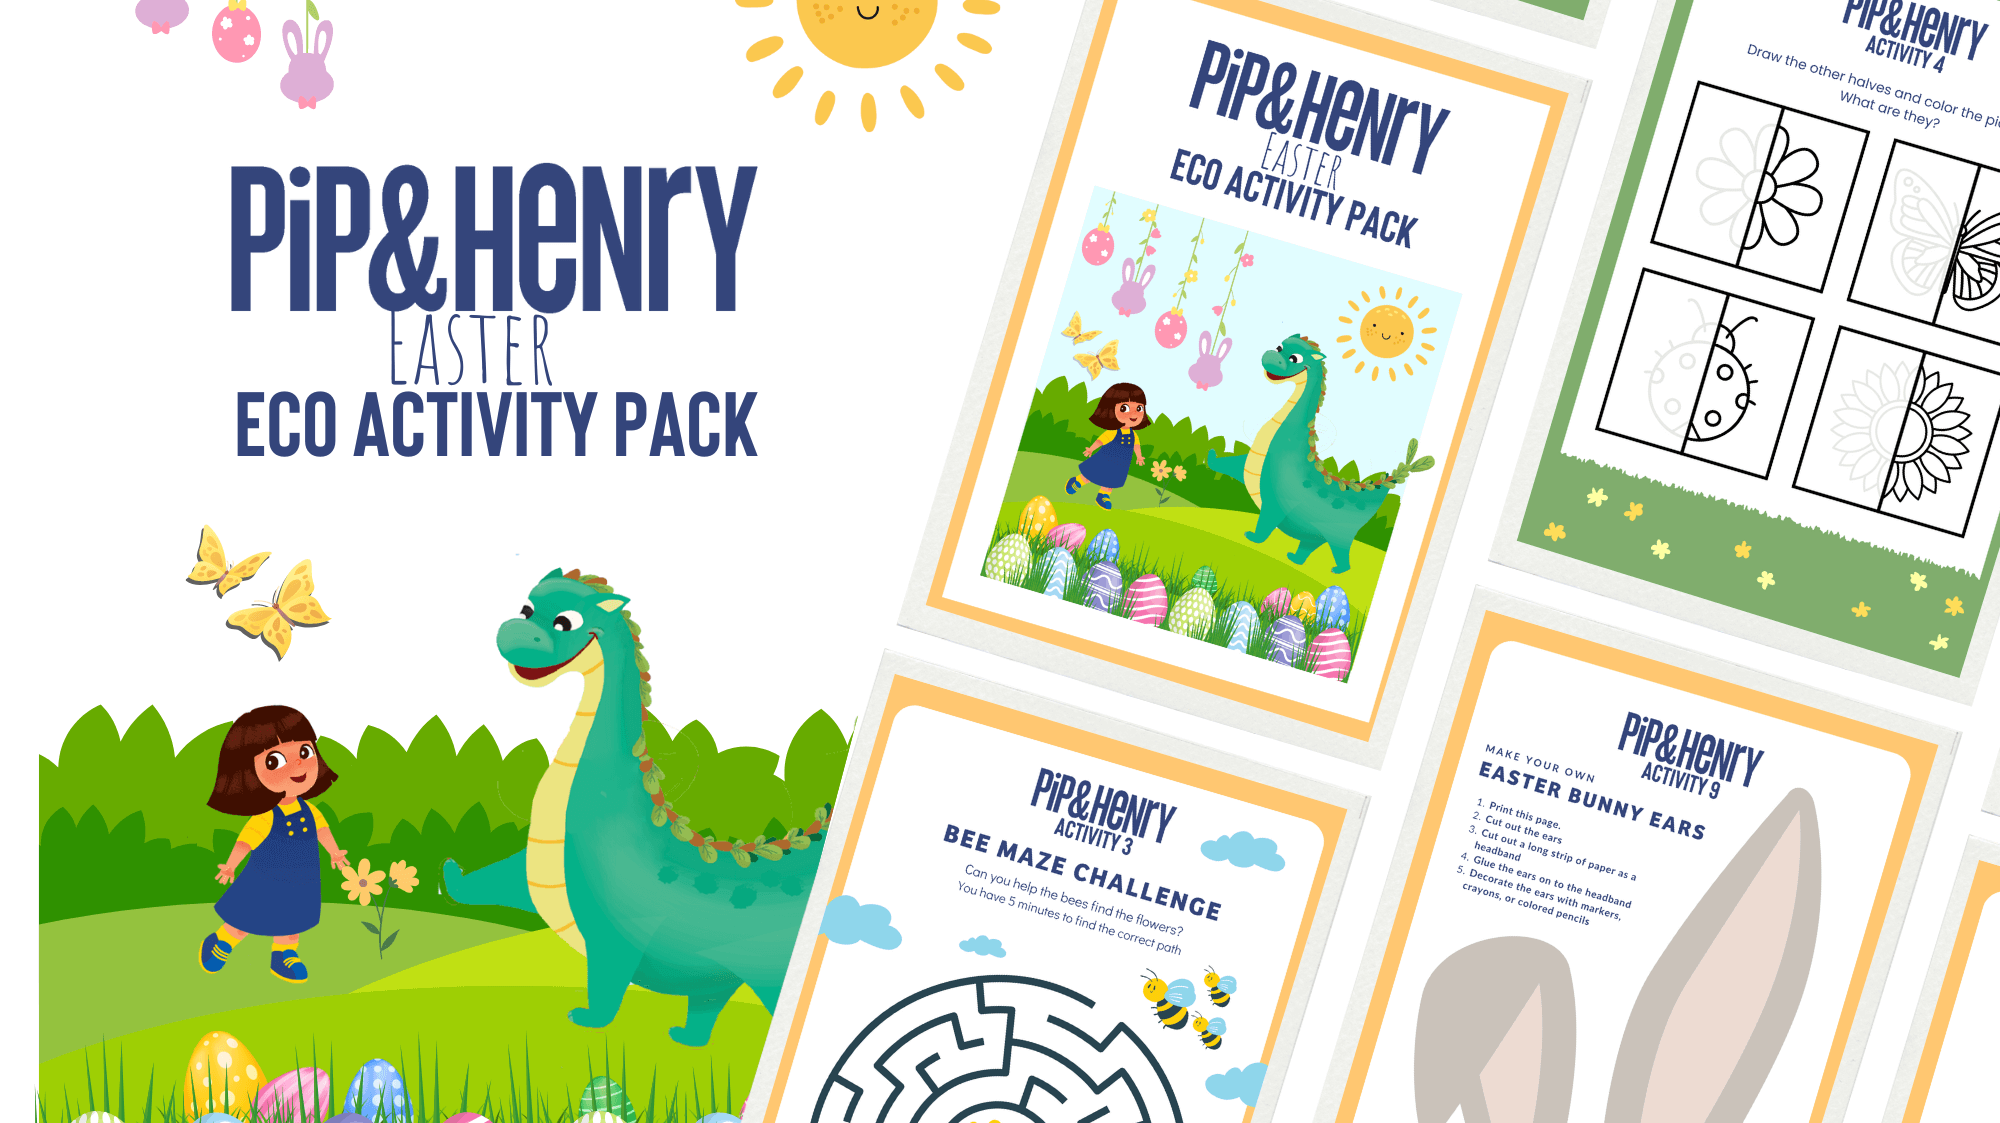 Our Easter Eco Activity Pack Is Here!